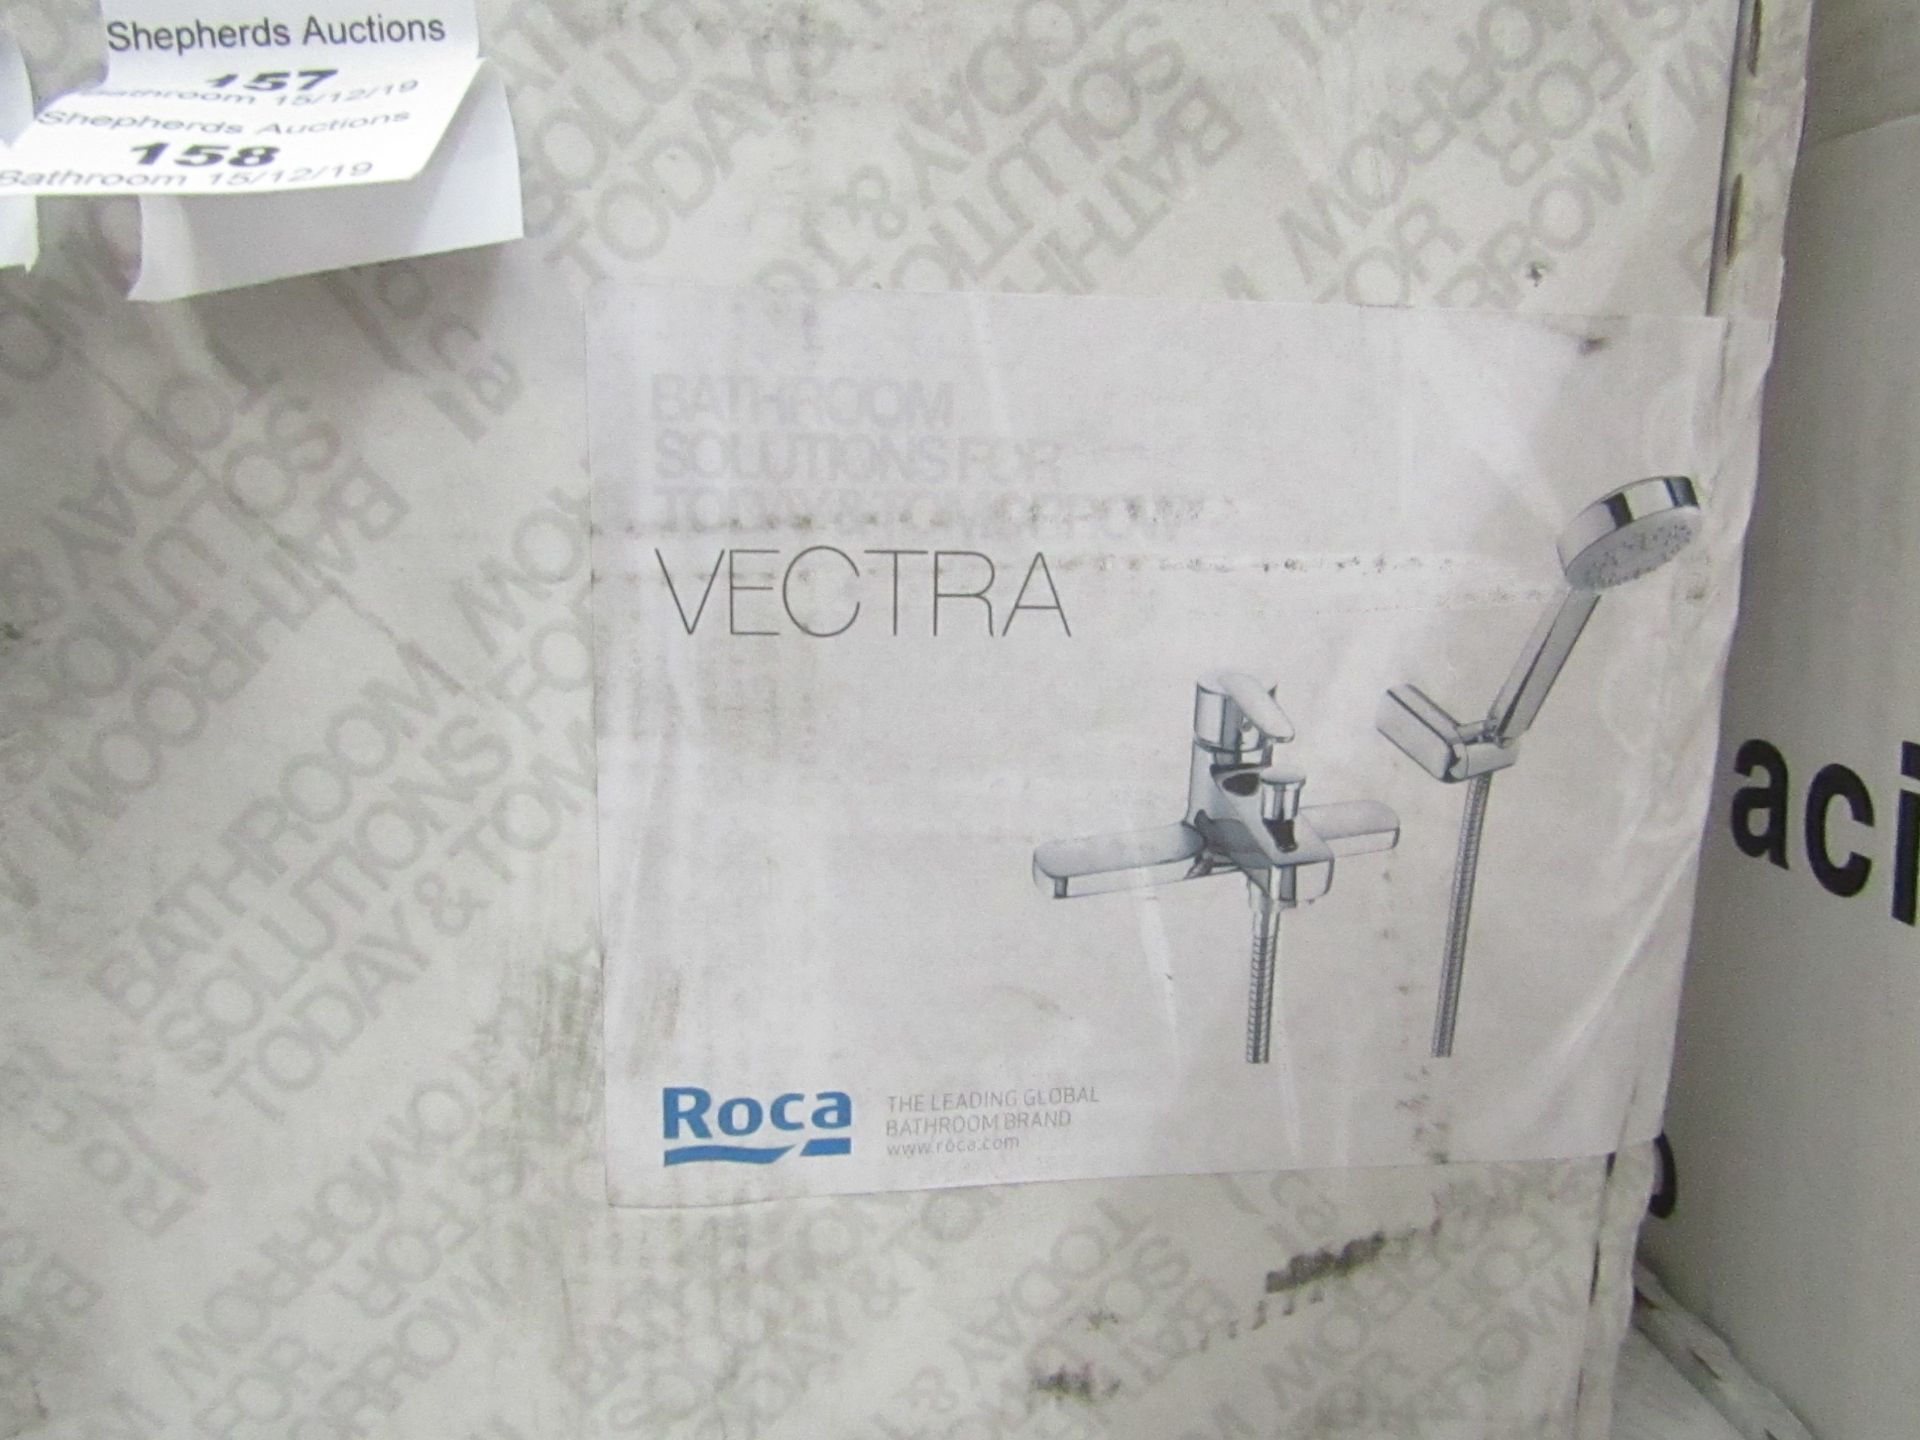 Roca Vectra bath and shower mixer, new and boxed.